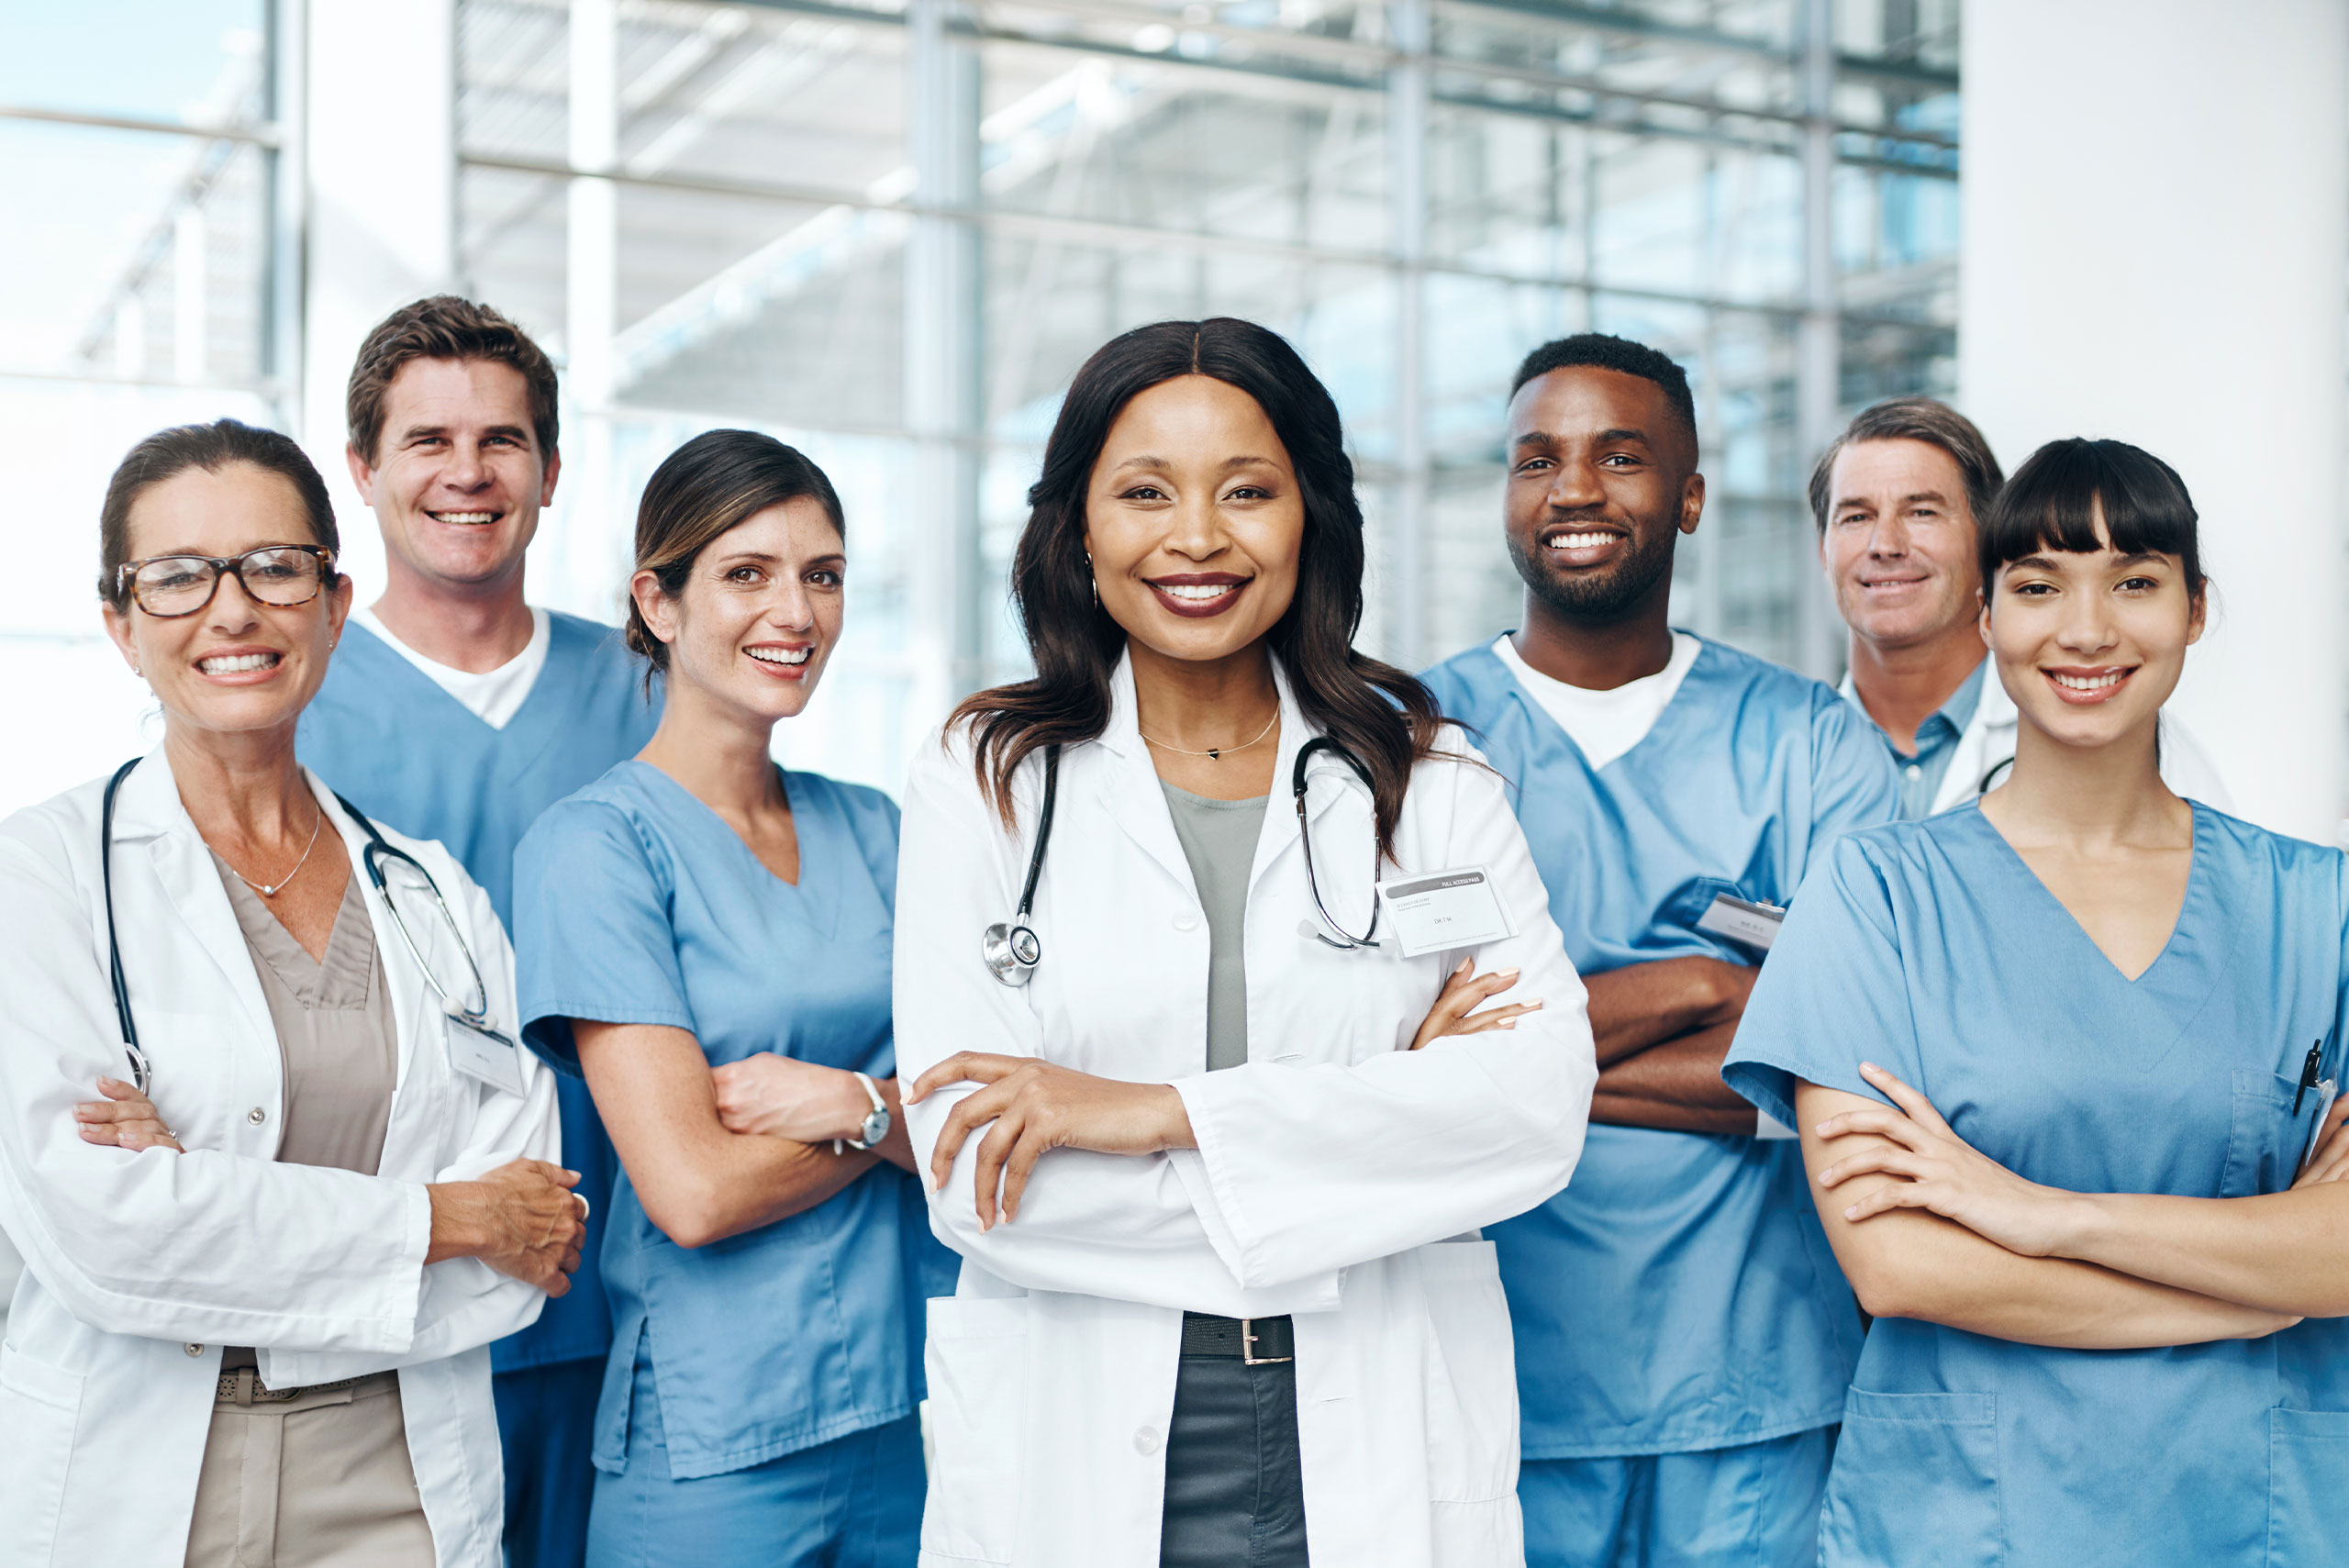 A group of diverse doctors and nurses partnering together.